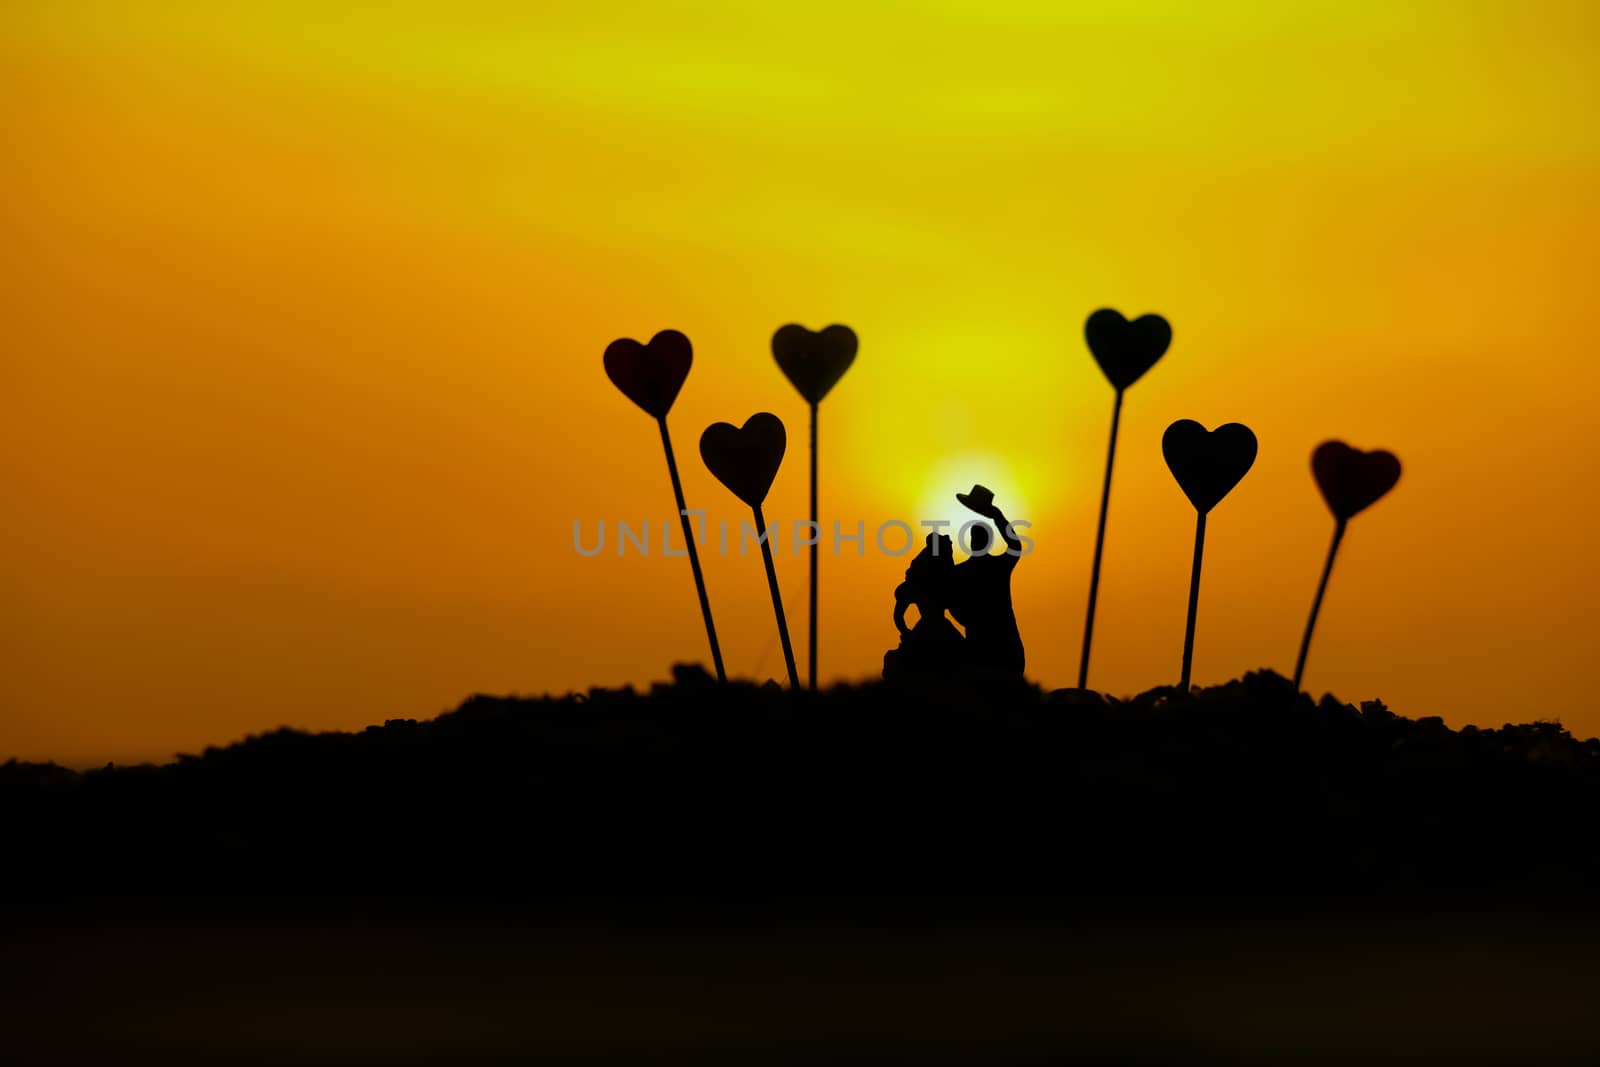 miniature people / toy photography - conceptual valentine holiday illustration. A Couple silhouette walking at the sand beach with heart balloon